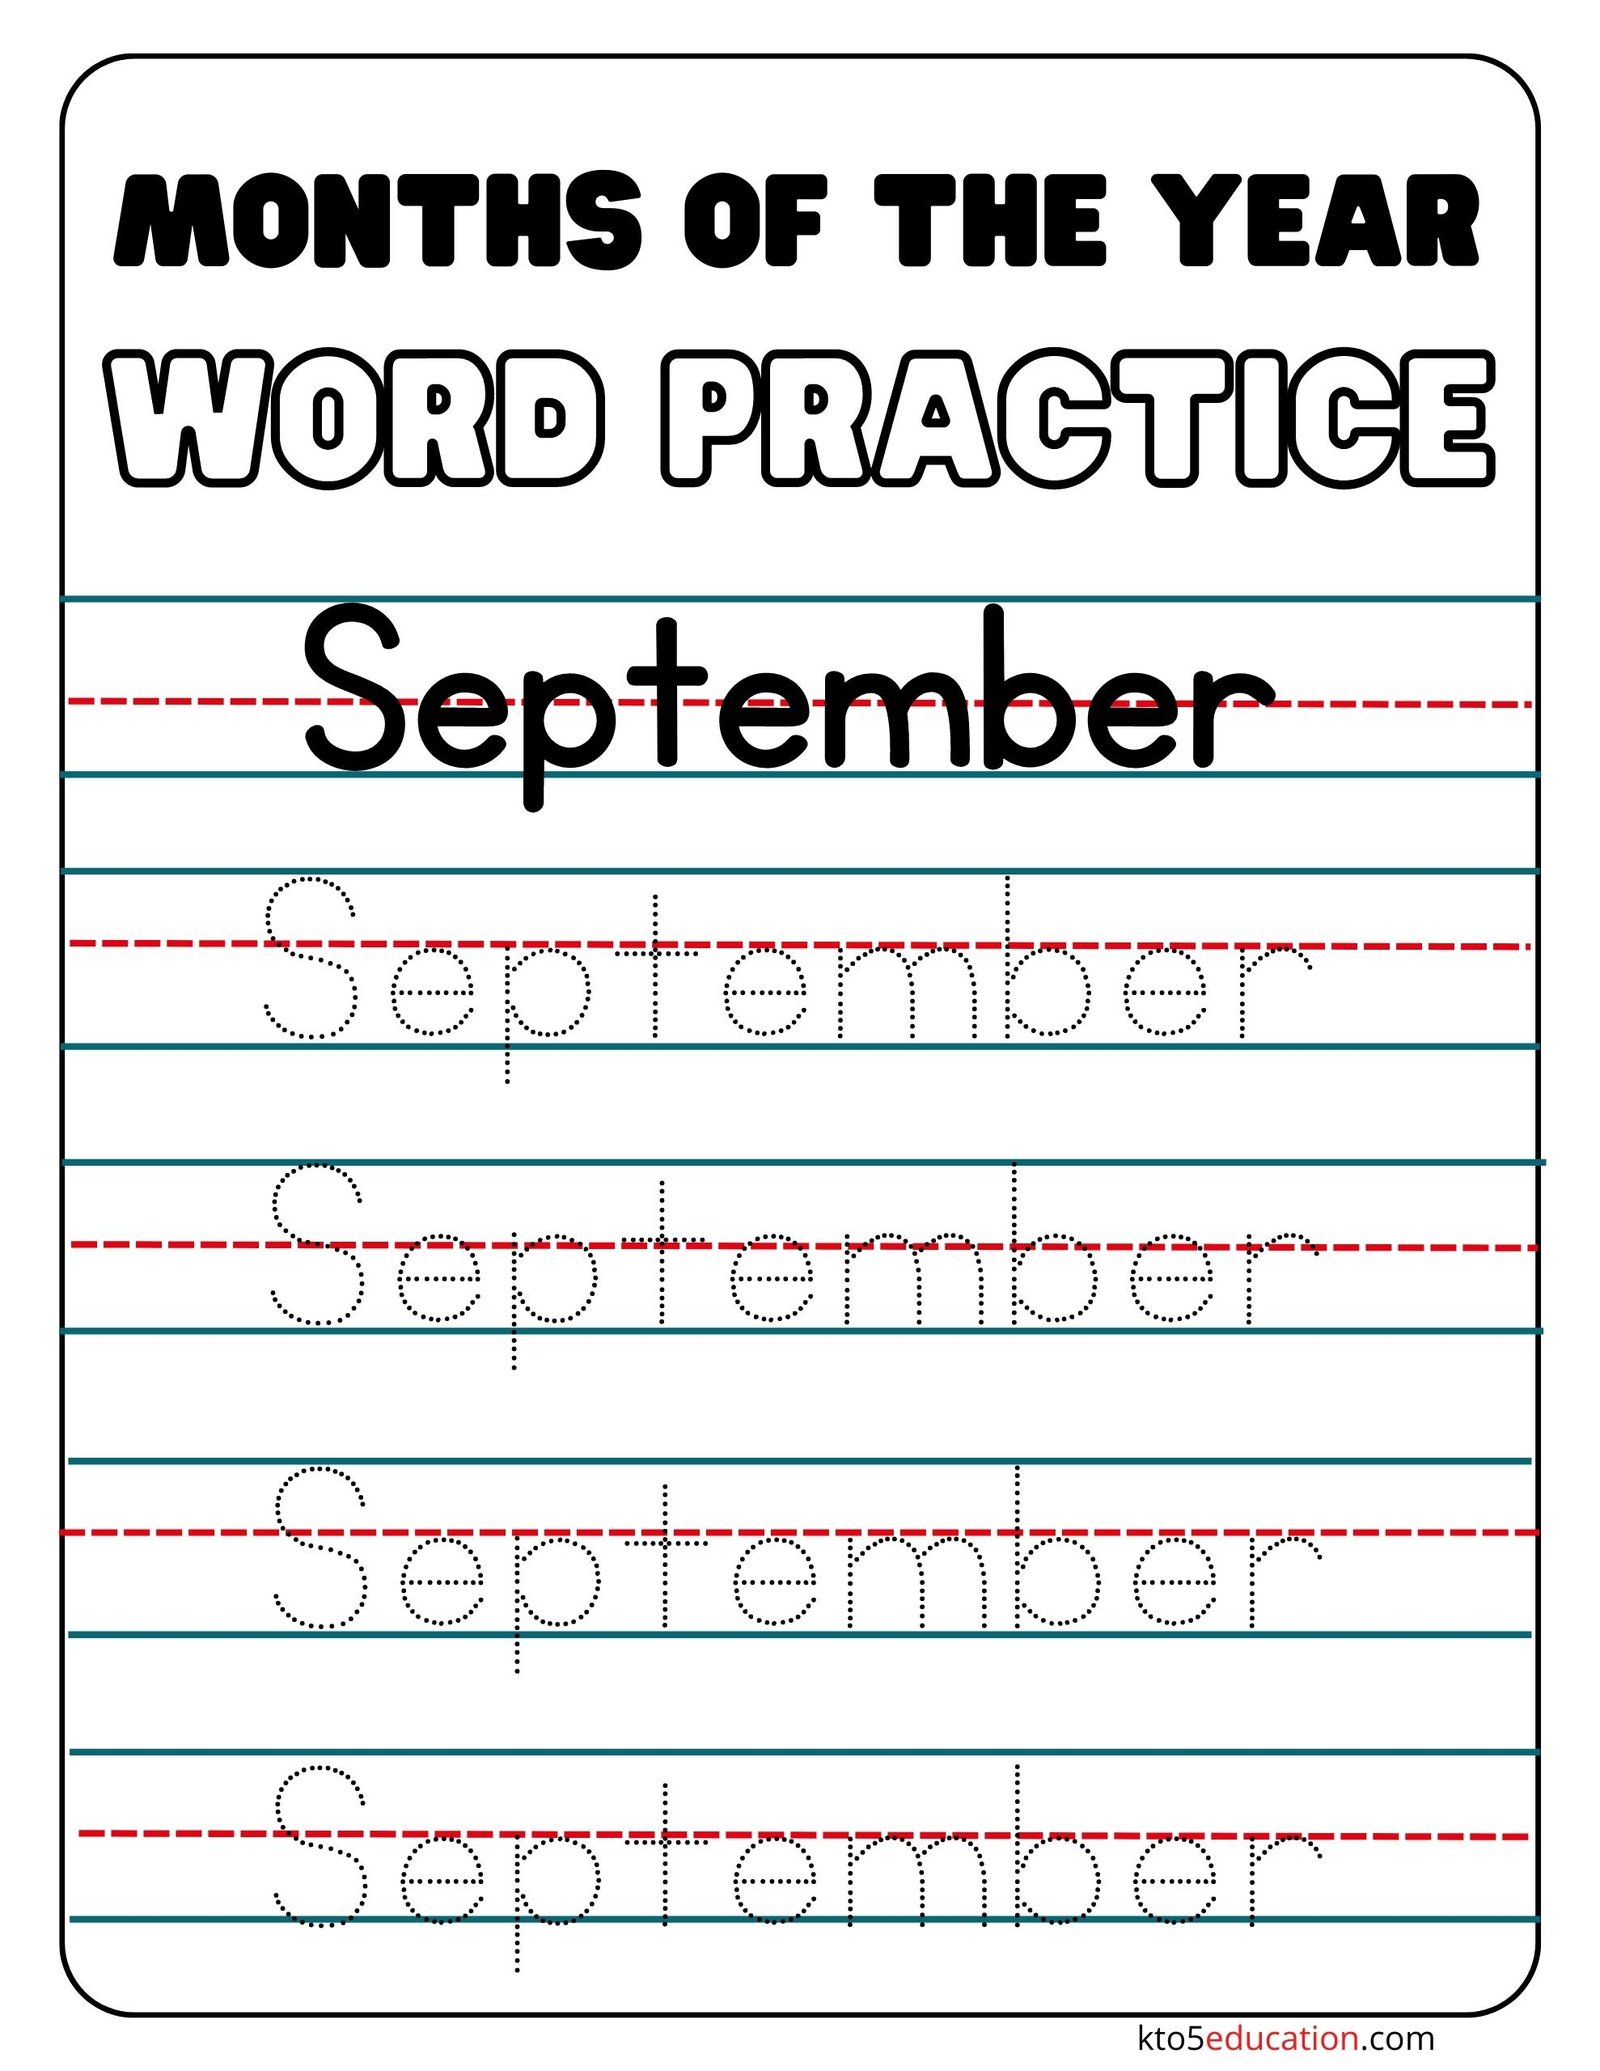 Months Of the year September Word Practice Worksheet